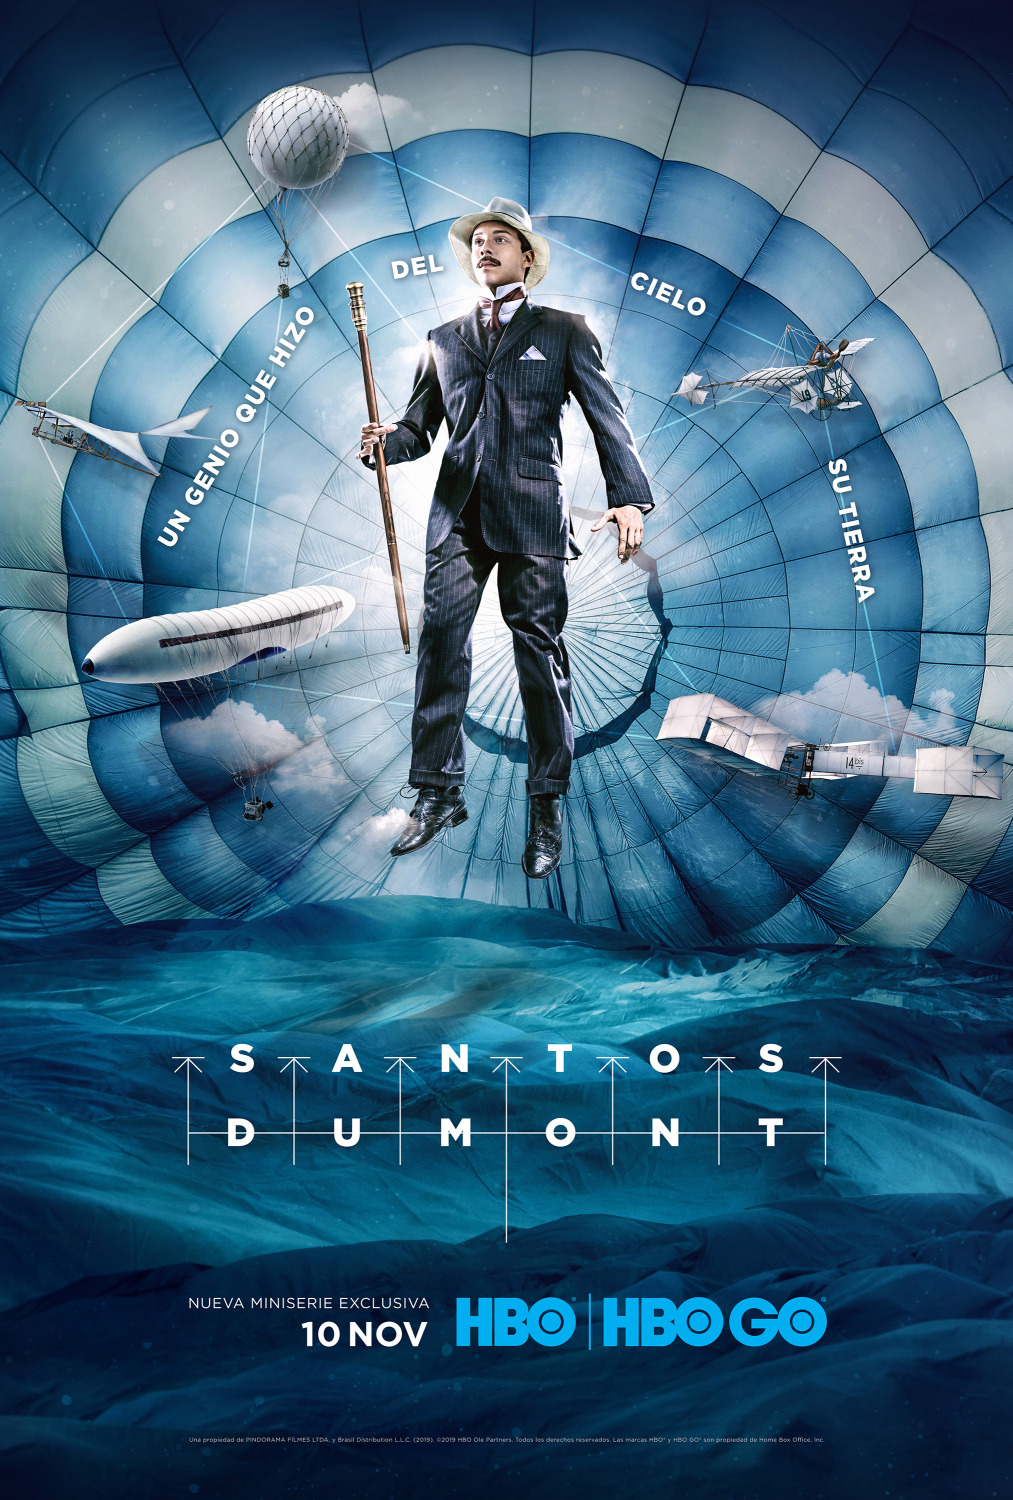 Extra Large TV Poster Image for Santos Dumont 